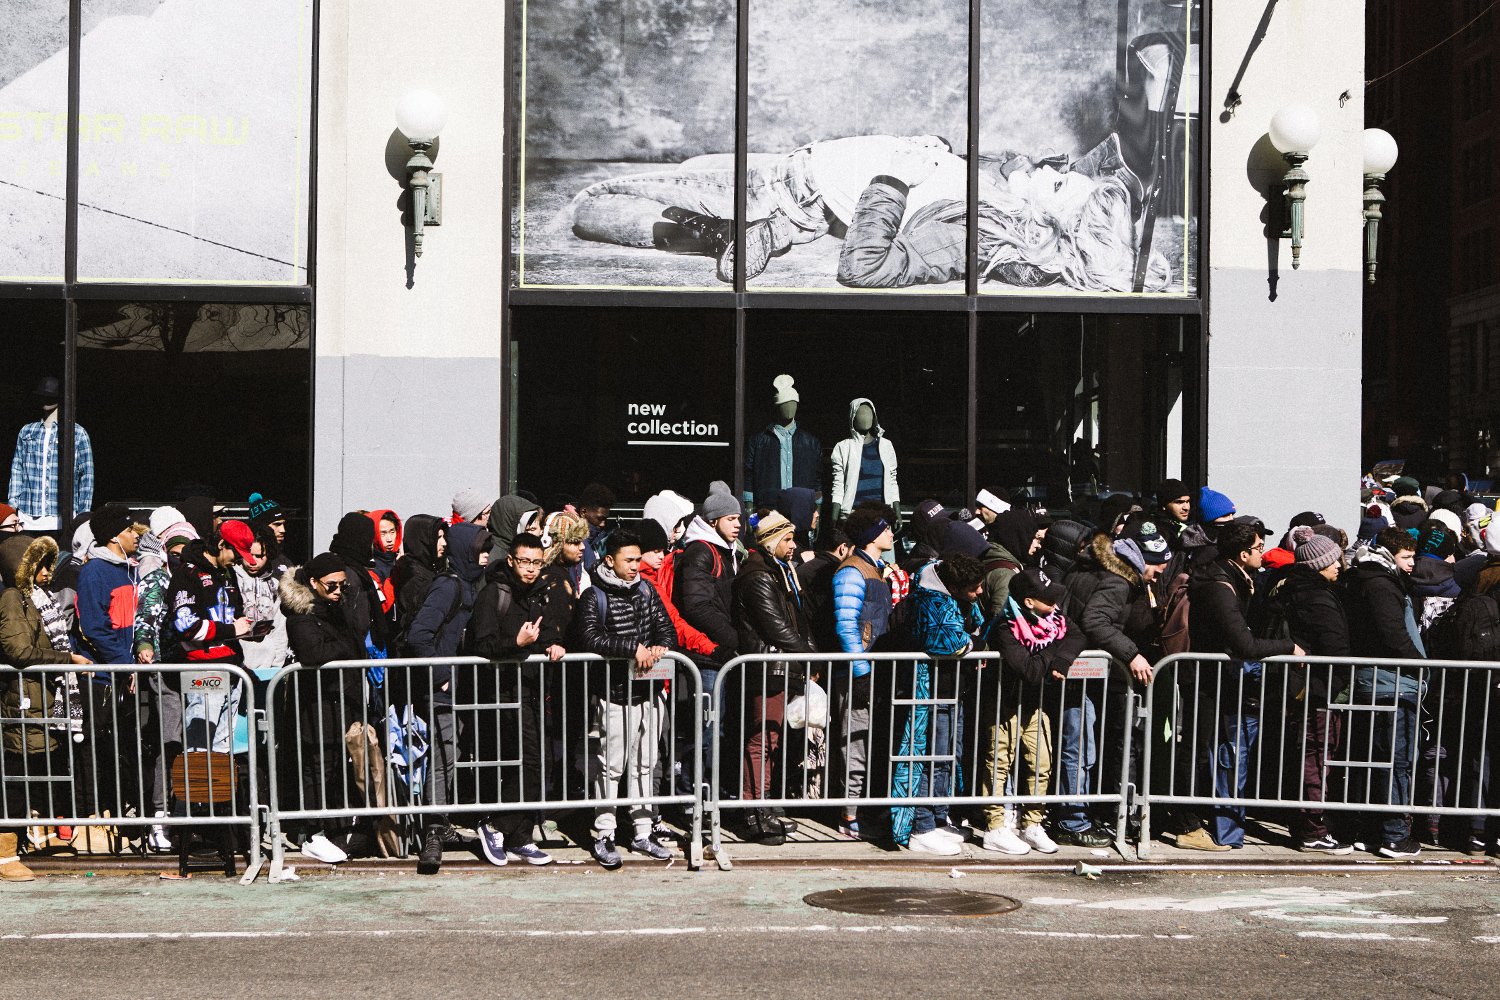 Long lines are a common sight outside of Supreme these days (photo courtesy of highsnobiety)